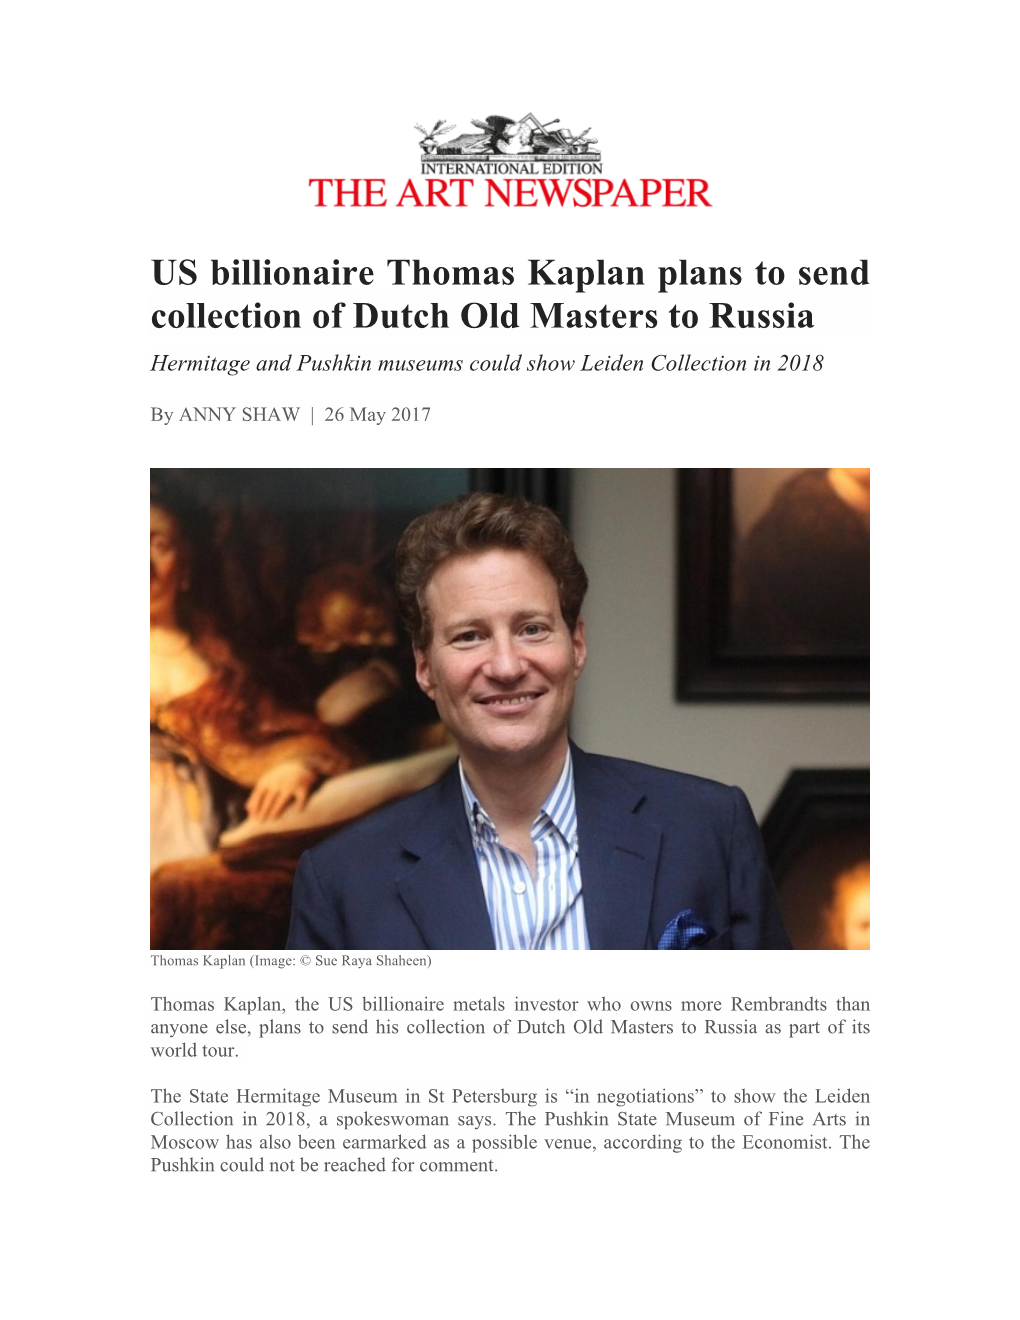 US Billionaire Thomas Kaplan Plans to Send Collection of Dutch Old Masters to Russia Hermitage and Pushkin Museums Could Show Leiden Collection in 2018